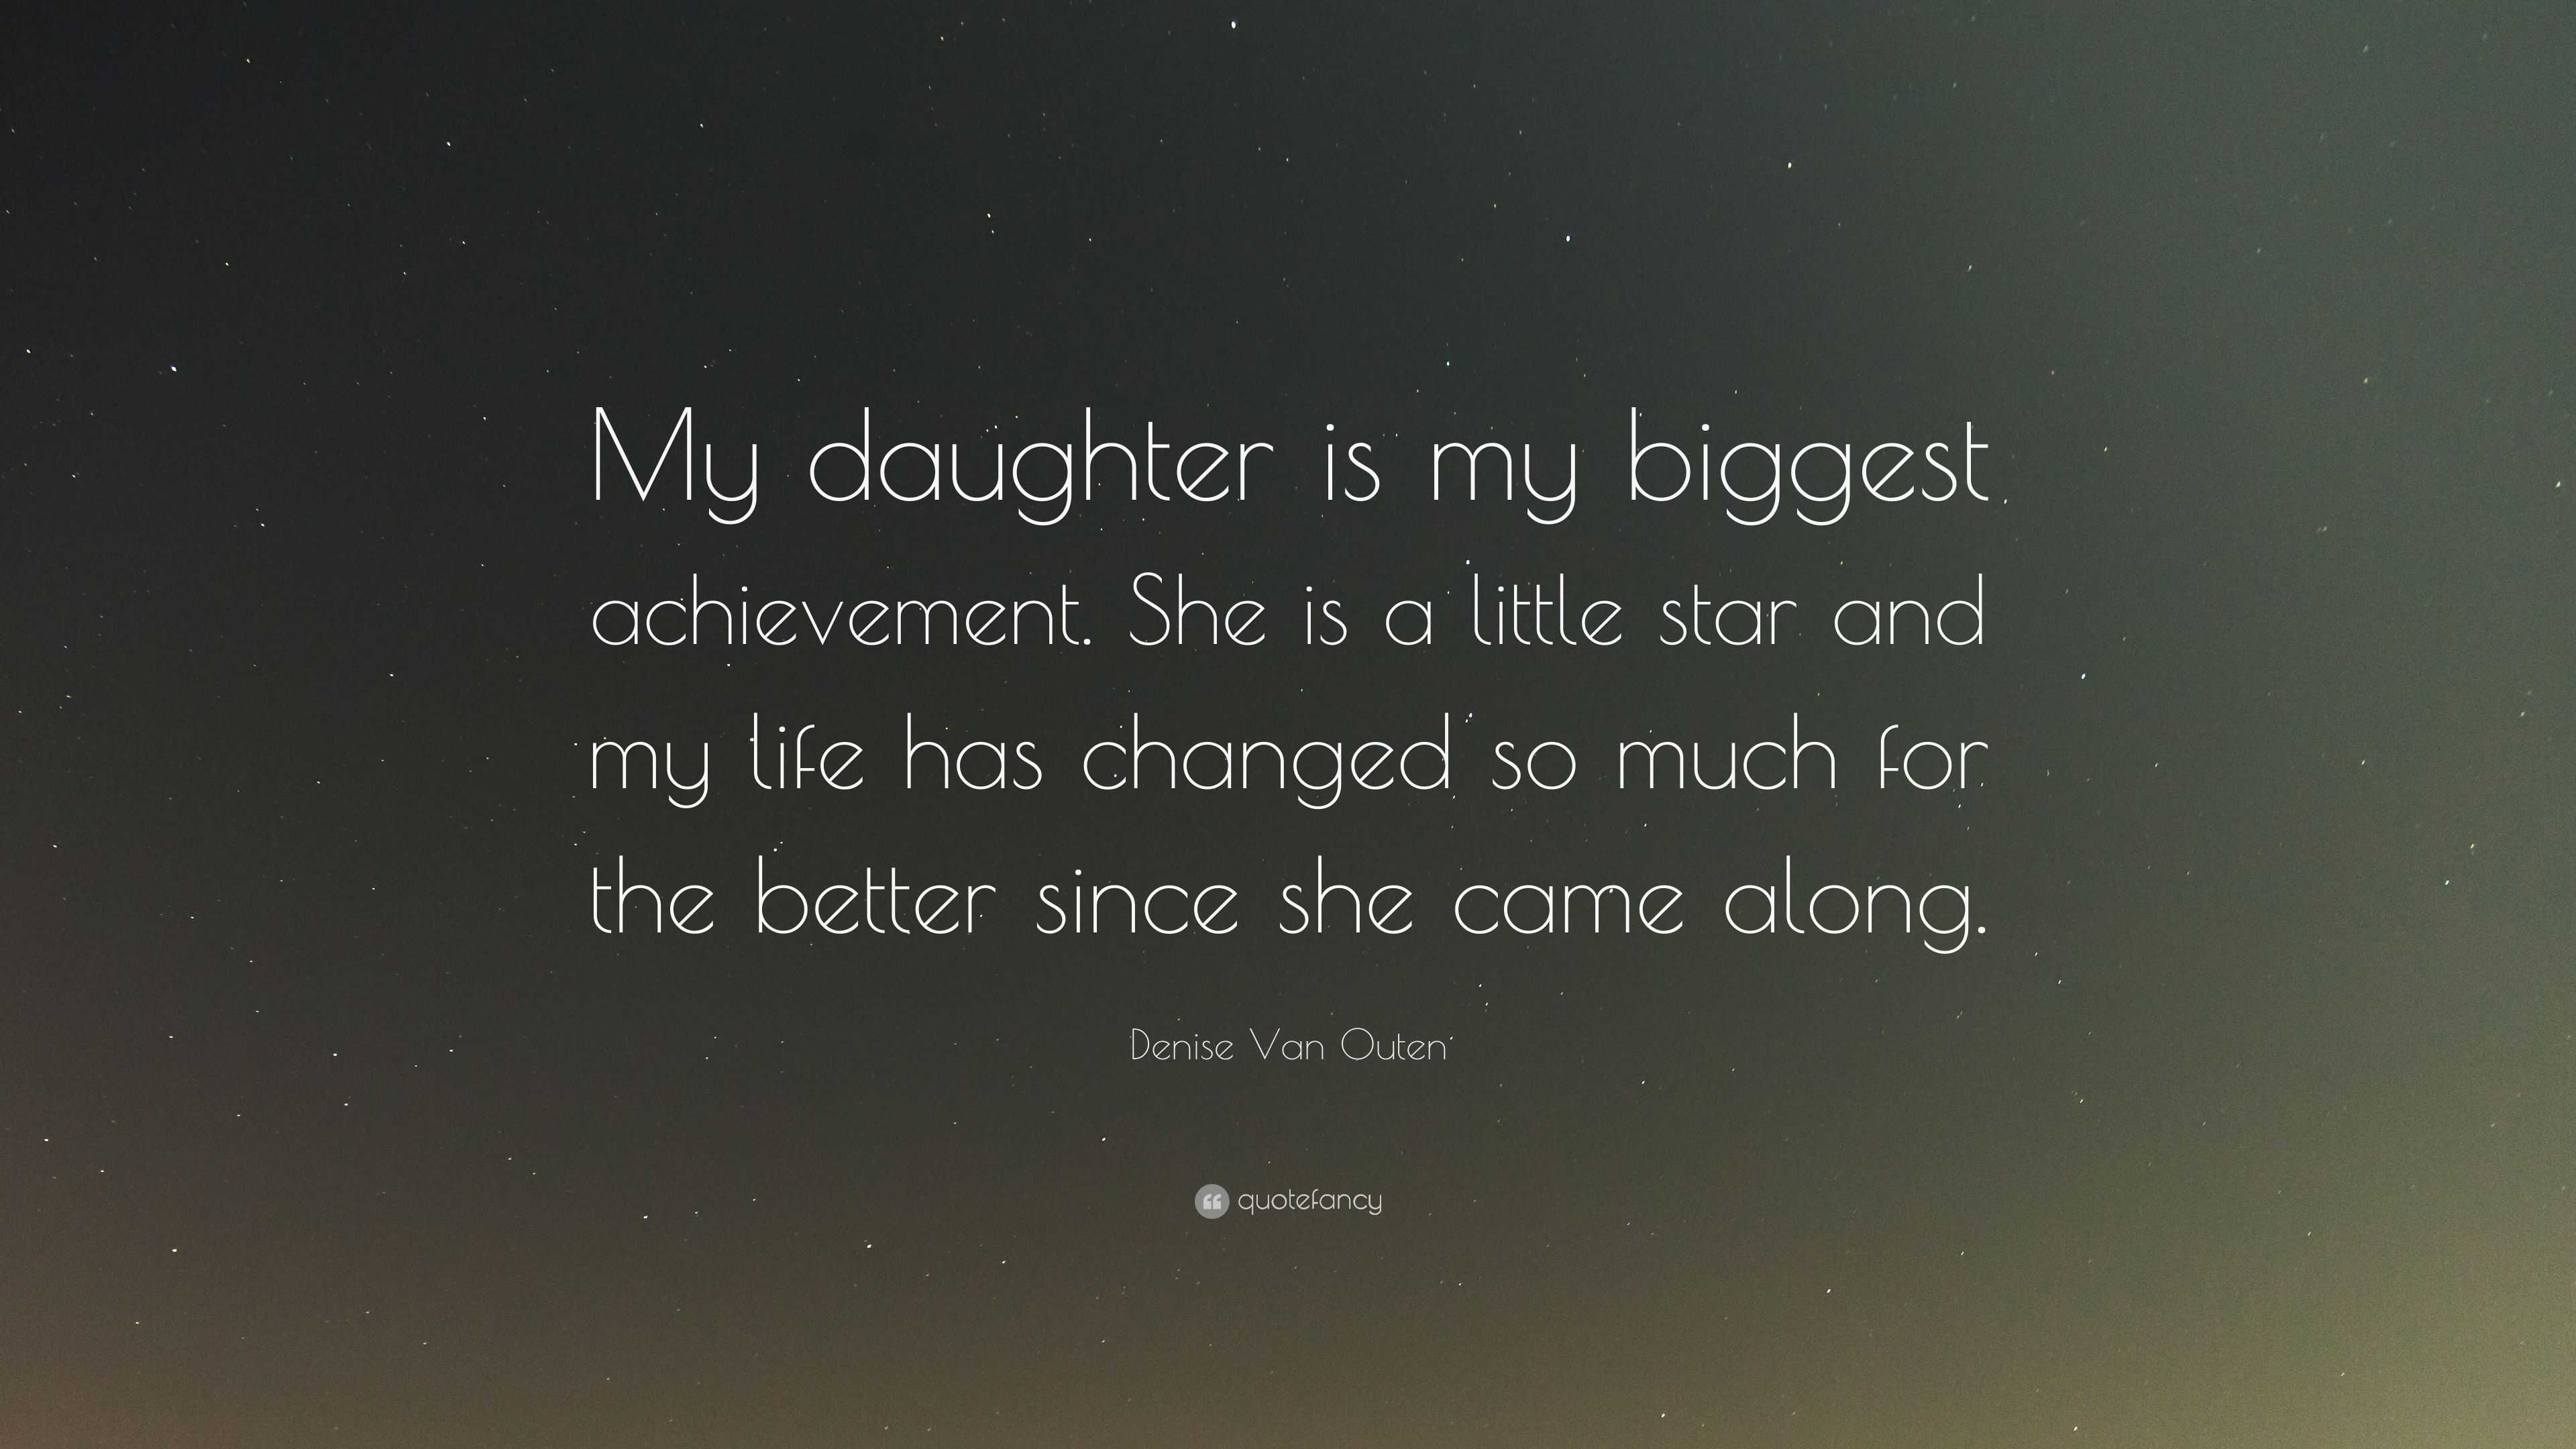 Denise Van Outen Quote “My daughter is my biggest achievement She is a